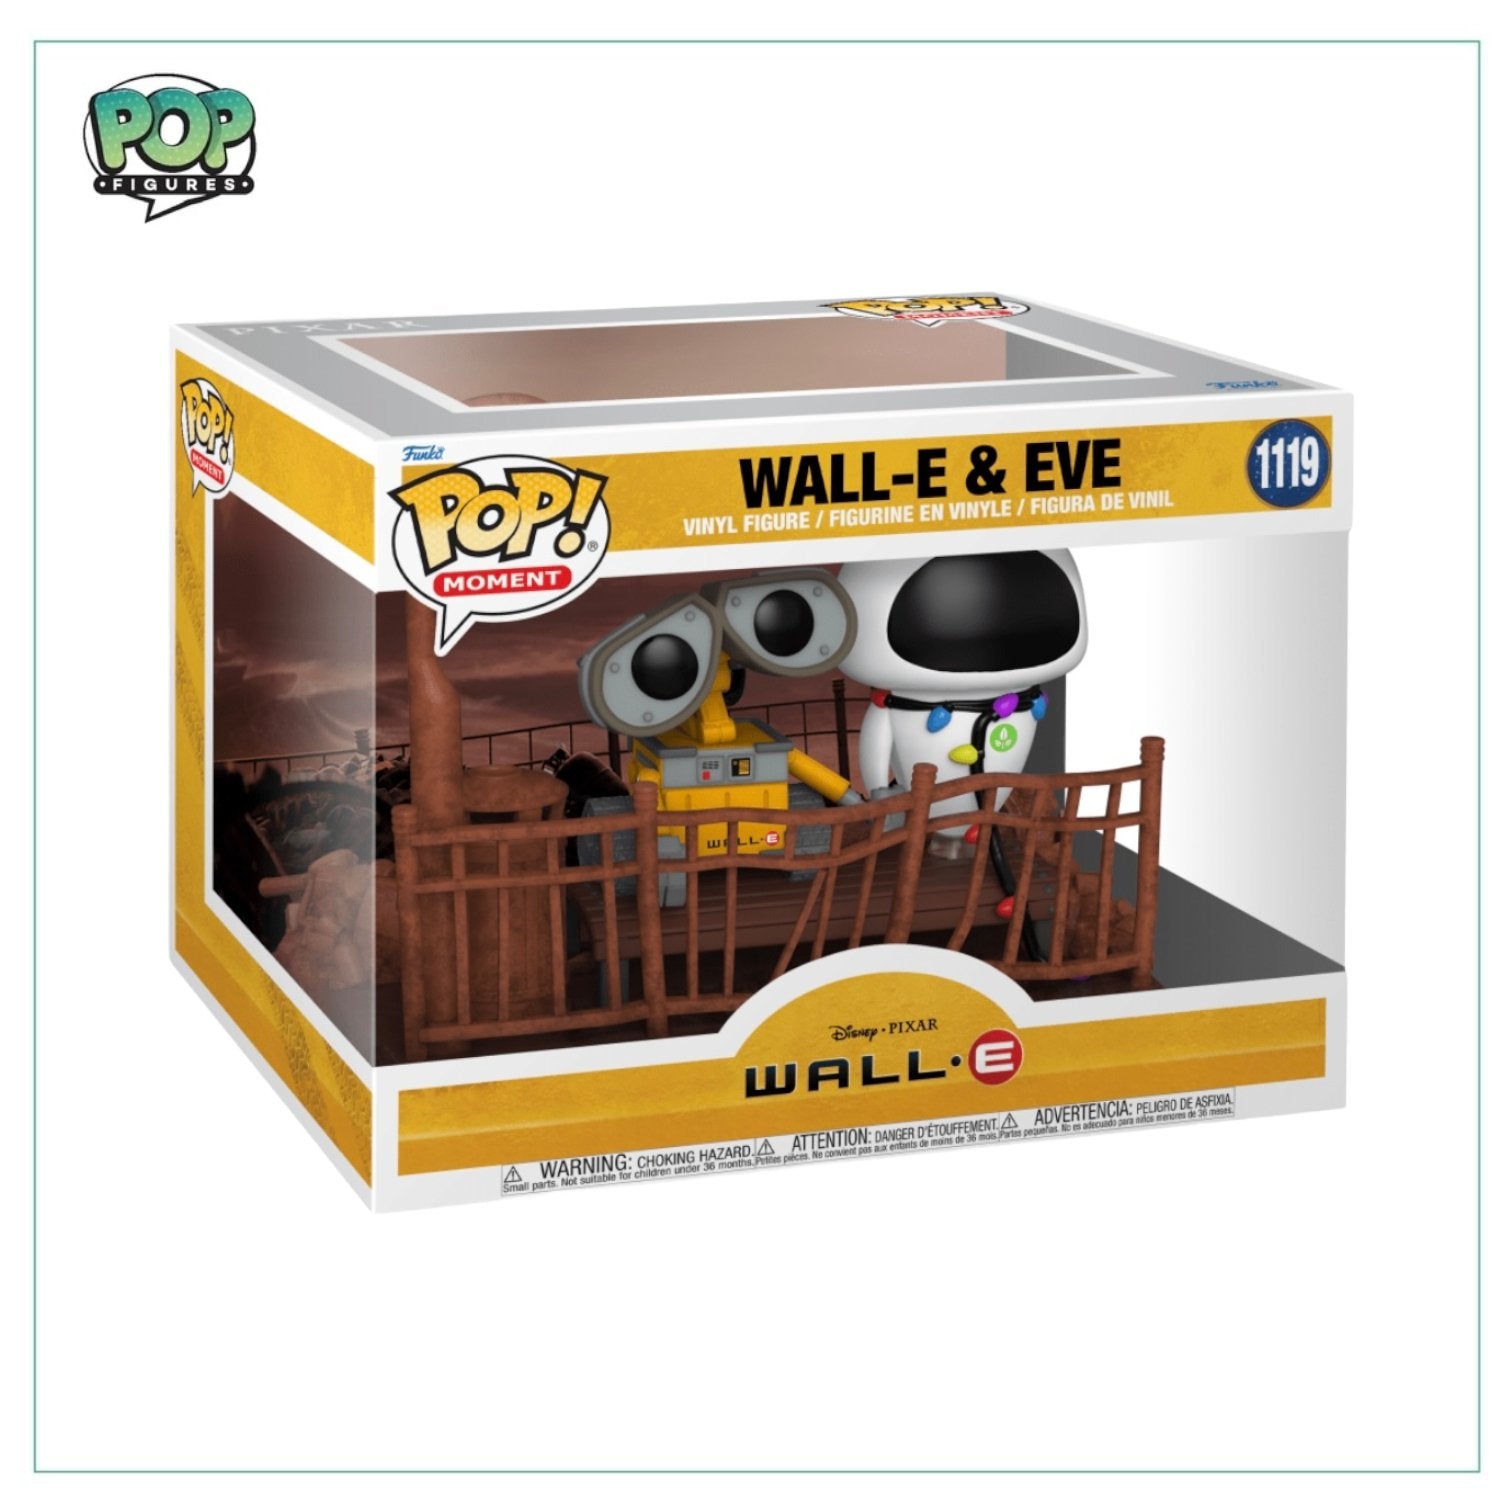 Wall-E & Eve #1119 Deluxe Funko Pop! Wall-E - Angry Cat